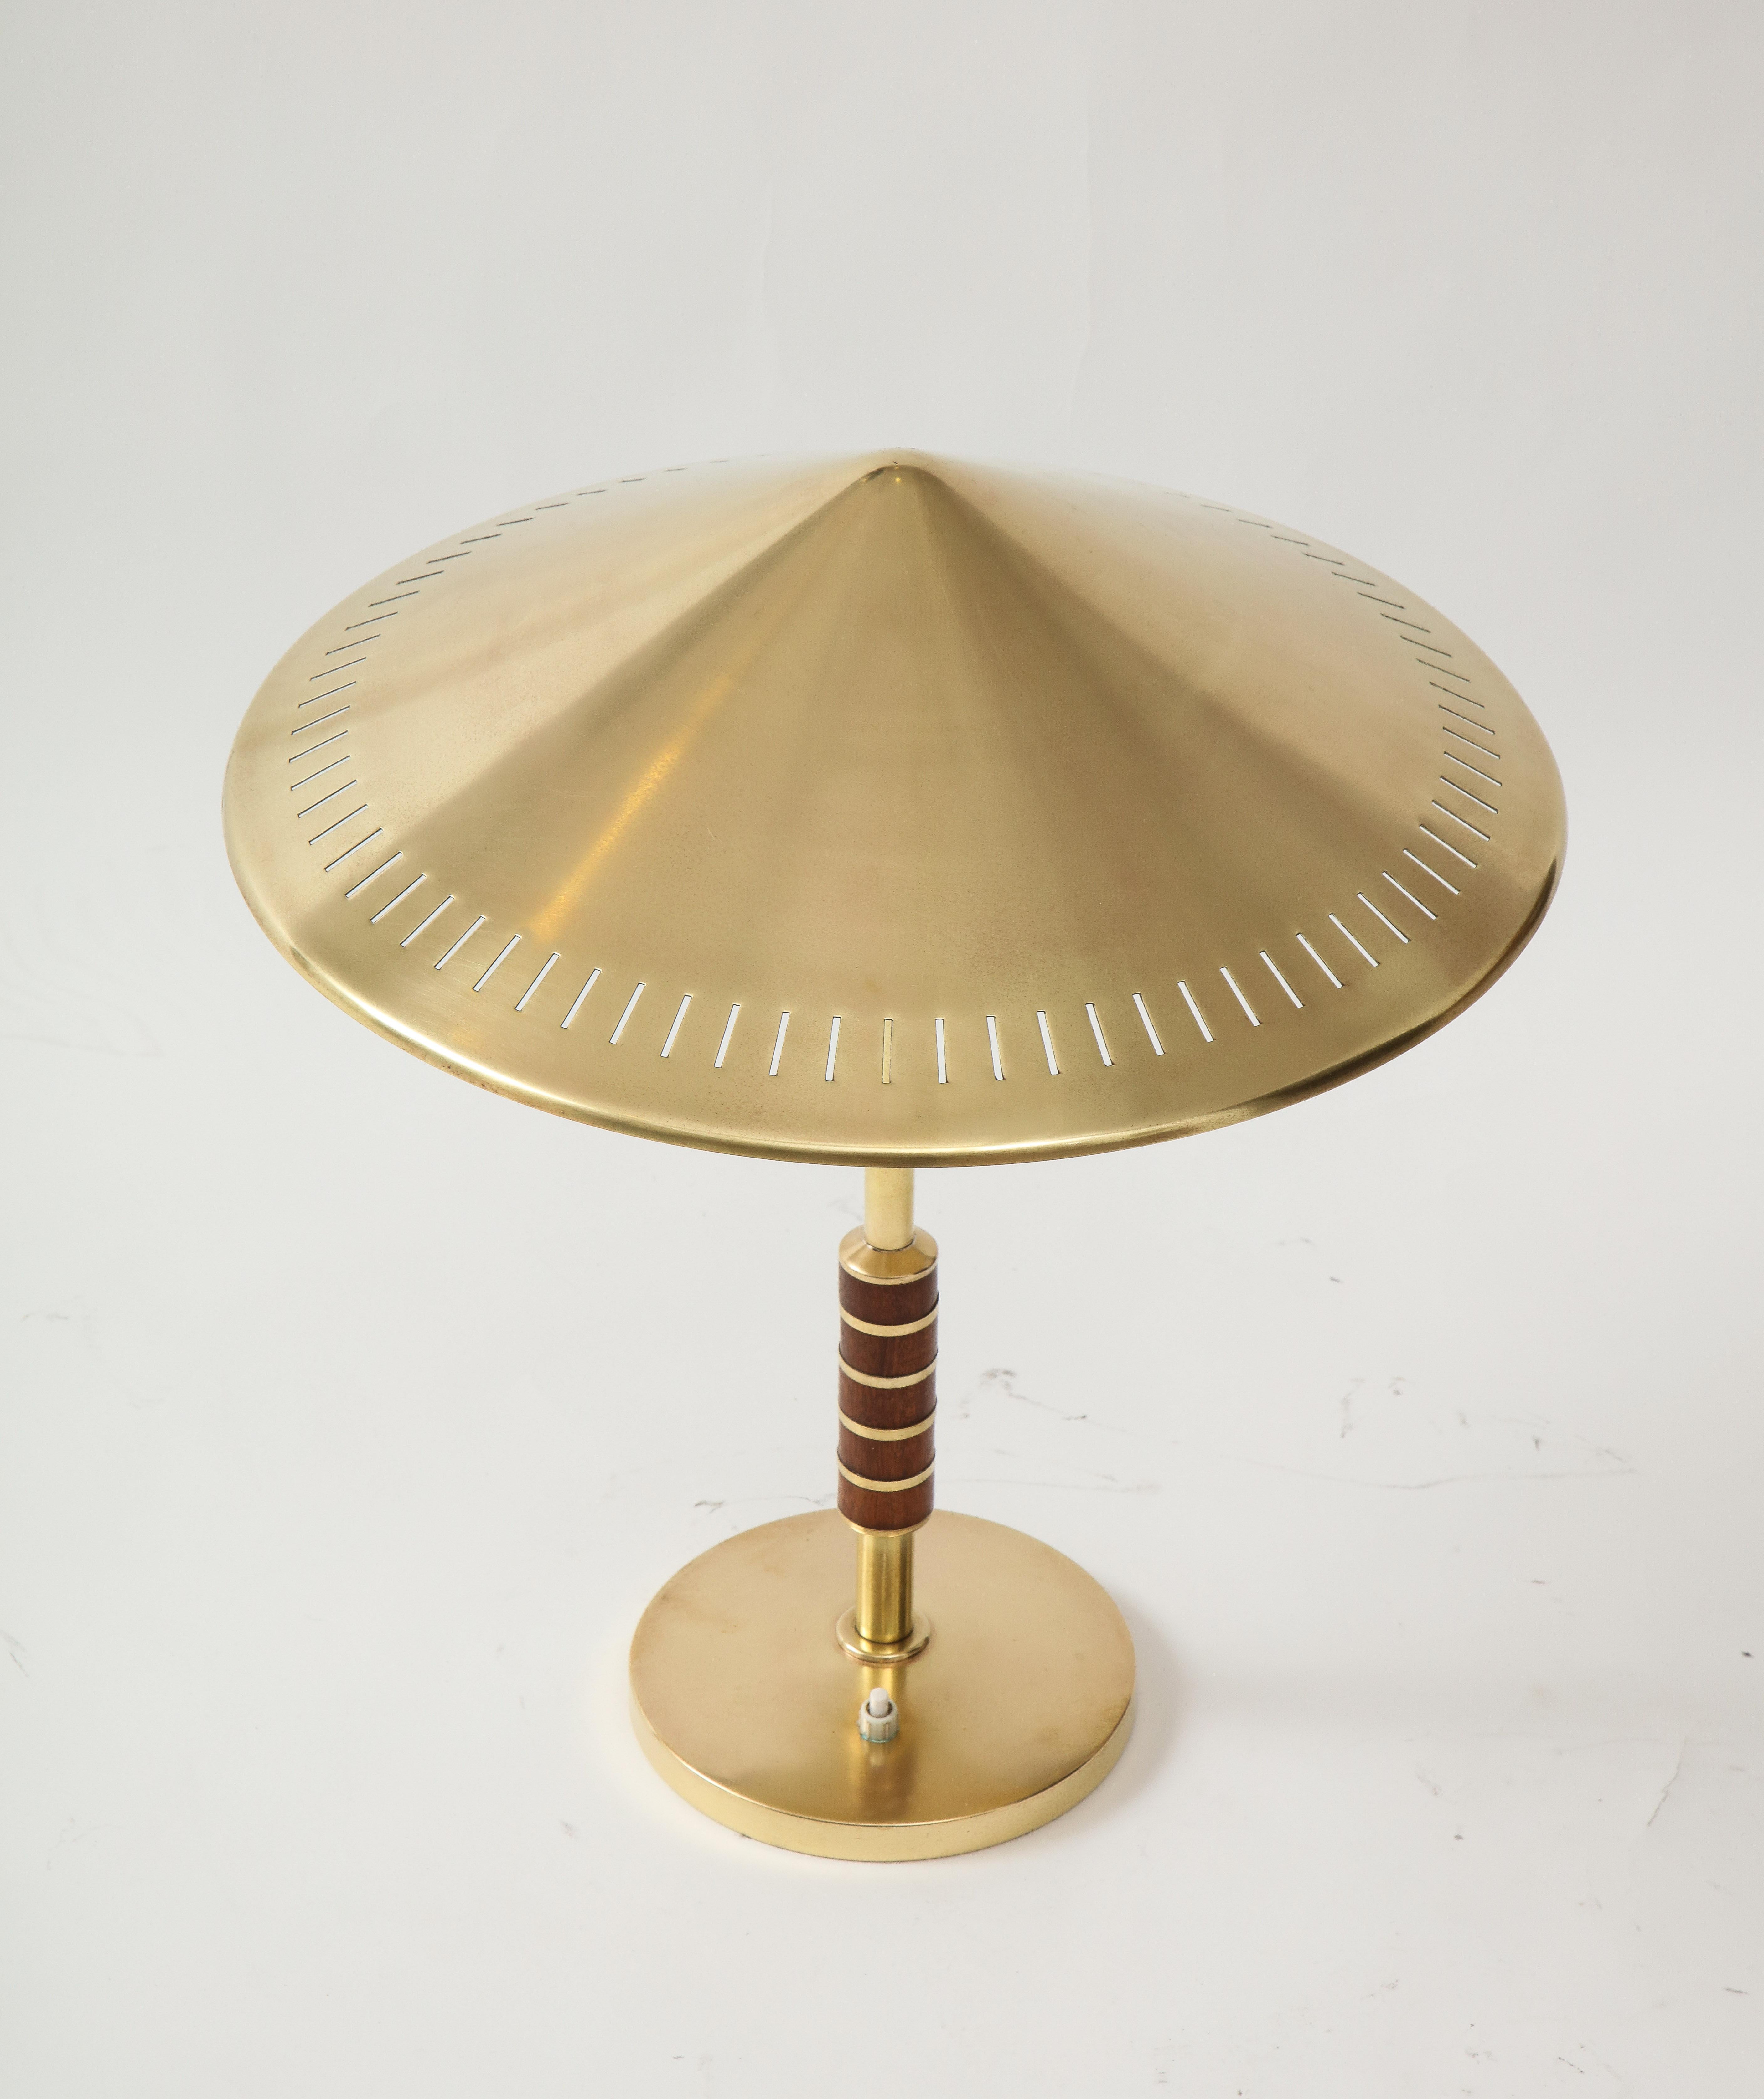 Scandinavian Modern Danish Brass Table Lamp Produced by Lyfa 1956 and Designed by Bent Karlby